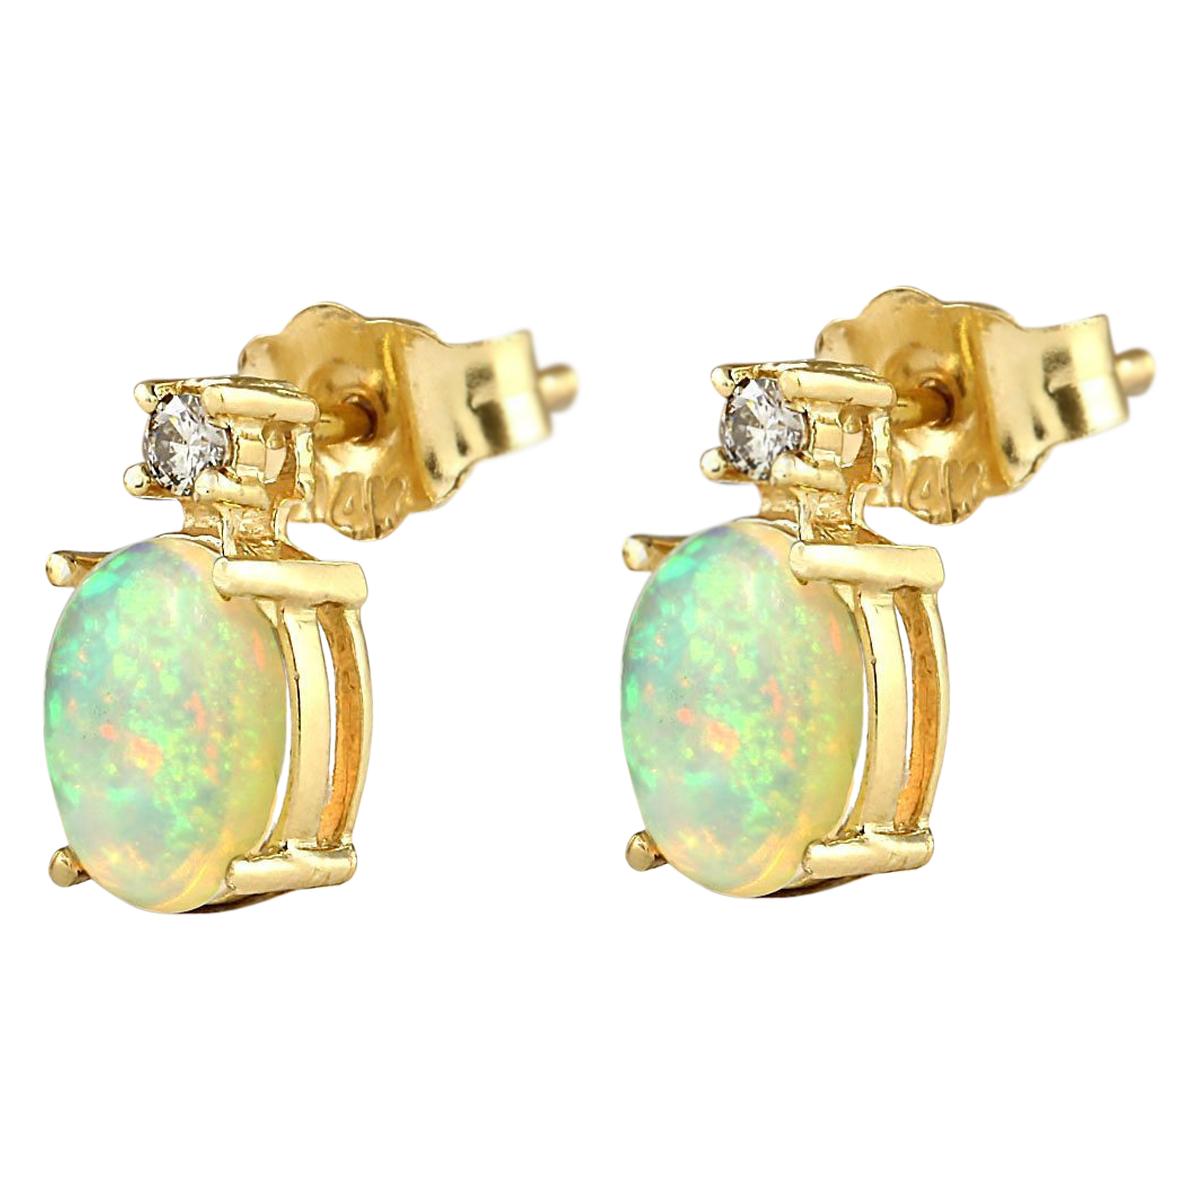 Stamped: 14K Yellow Gold
Total Earrings Weight: 1.3 Grams
Total Natural Opal Weight is 1.50 Carat (Measures: 7.00x5.00 mm)
Color: Multicolor
Total Natural Diamond Weight is 0.10 Carat
Color: F-G, Clarity: VS2-SI1
Face Measures: 10.10x5.00 mm
Sku: